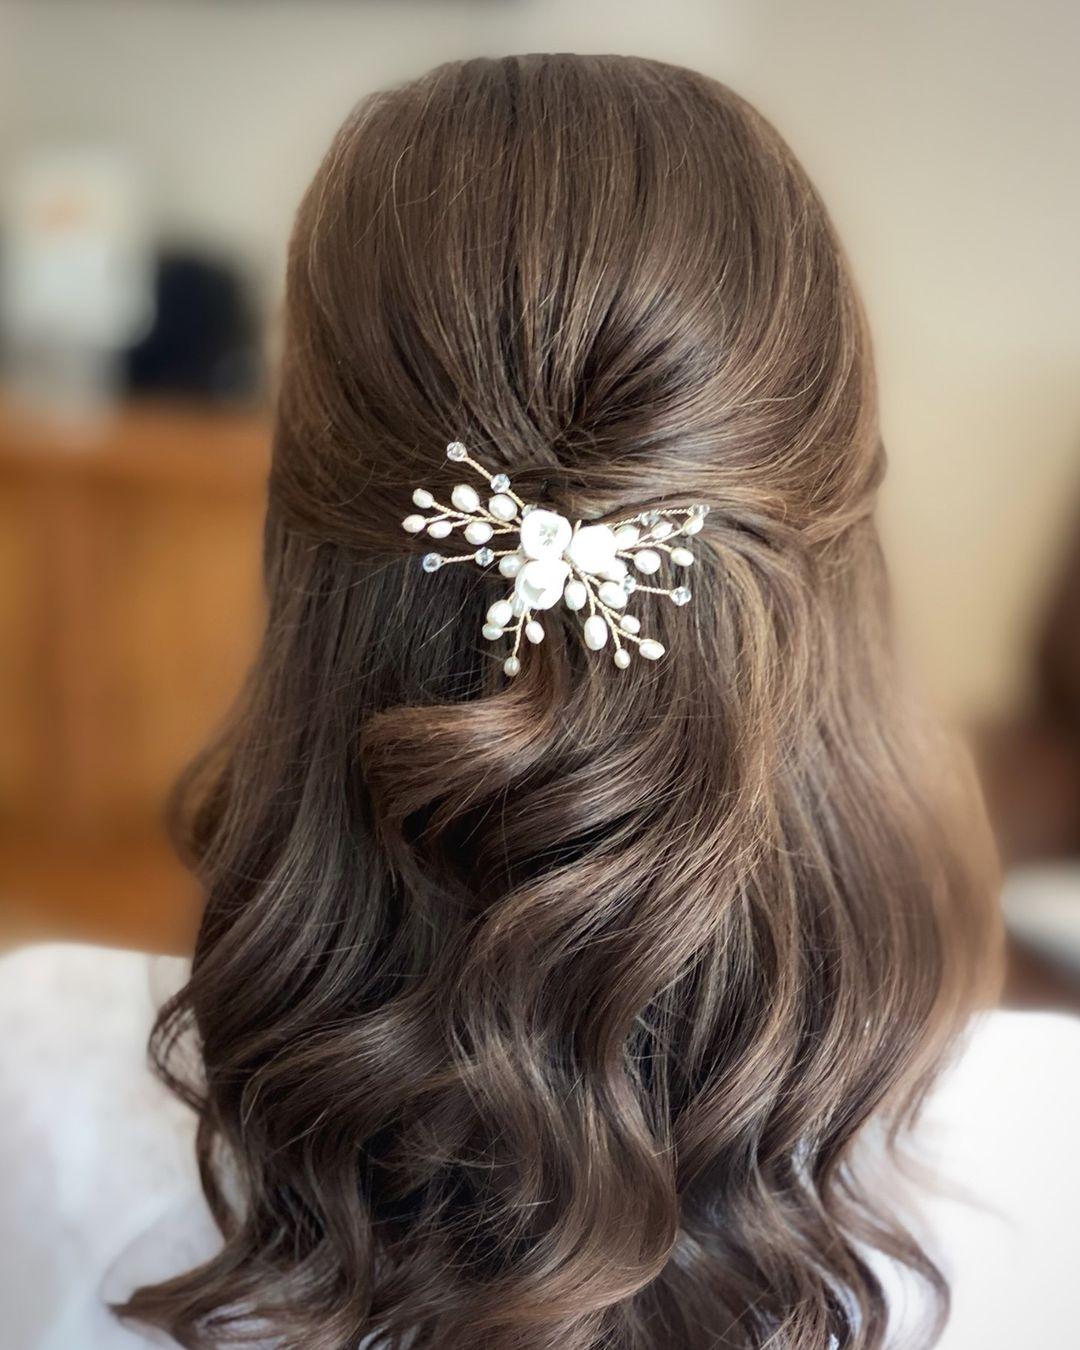 Half Up Half Down Wedding Hairstyles: 23 Inspirational Ideas & Tips -  hitched.co.uk